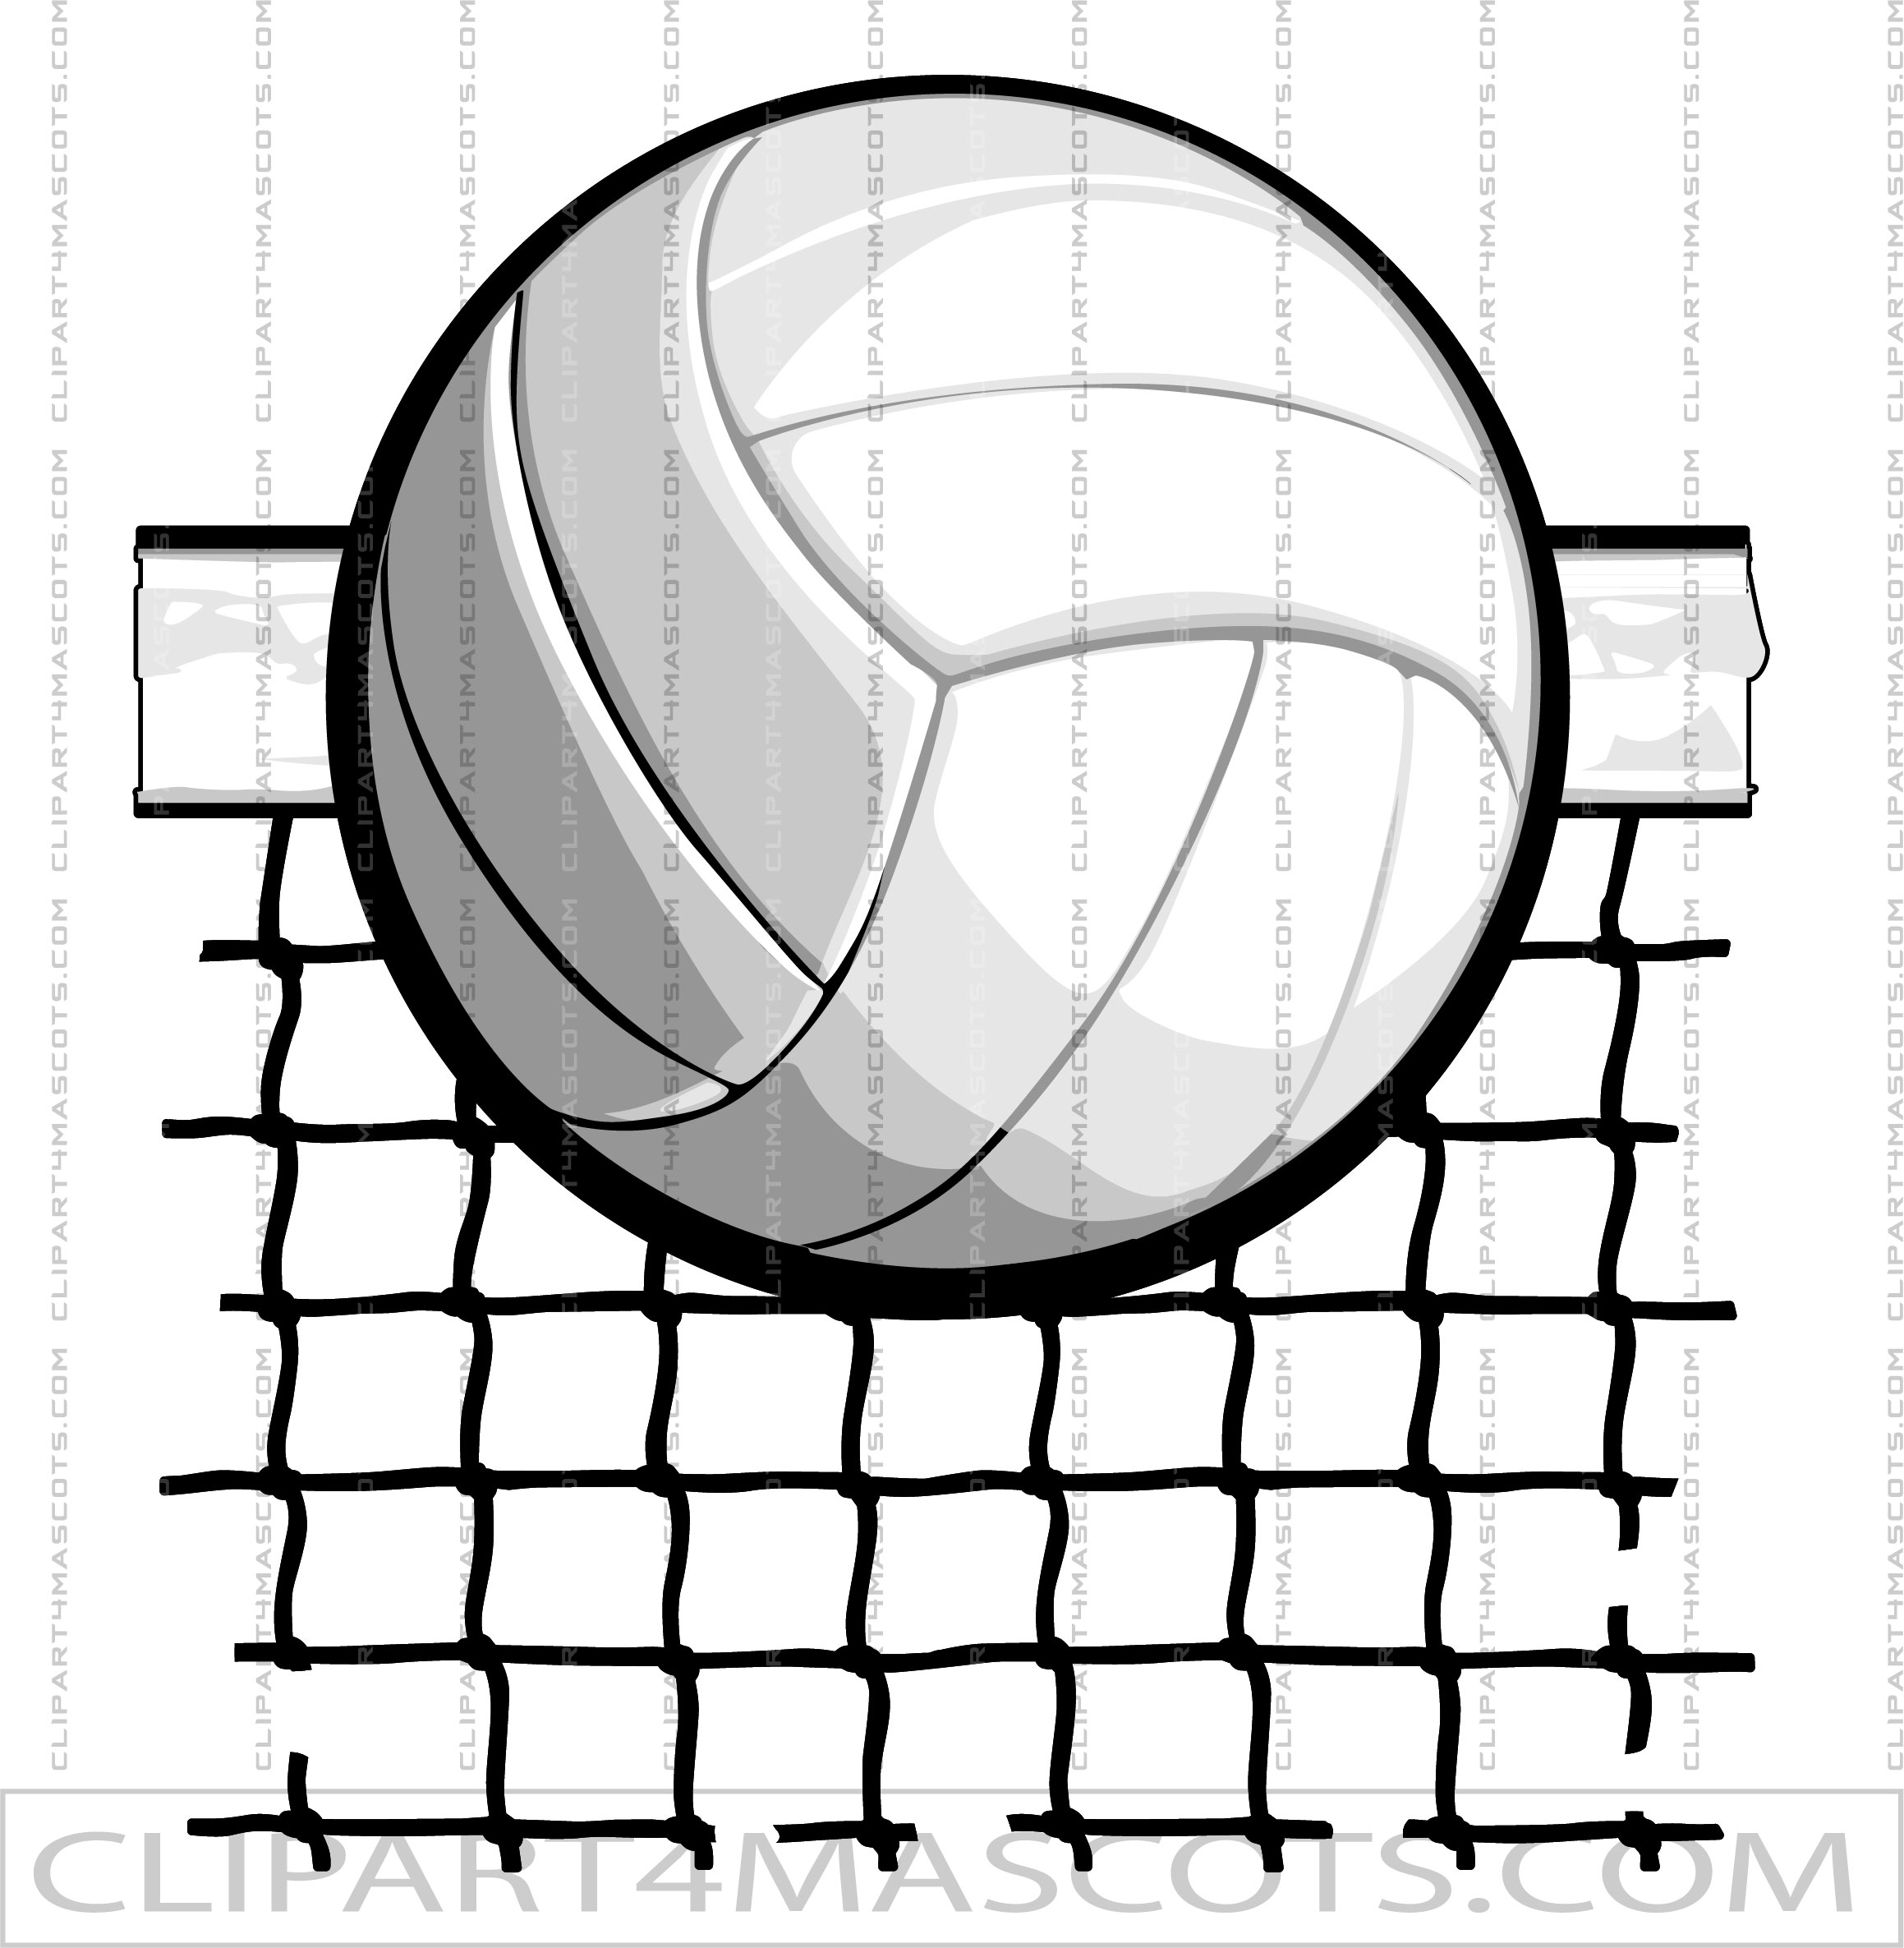 Volleyball Net Graphic